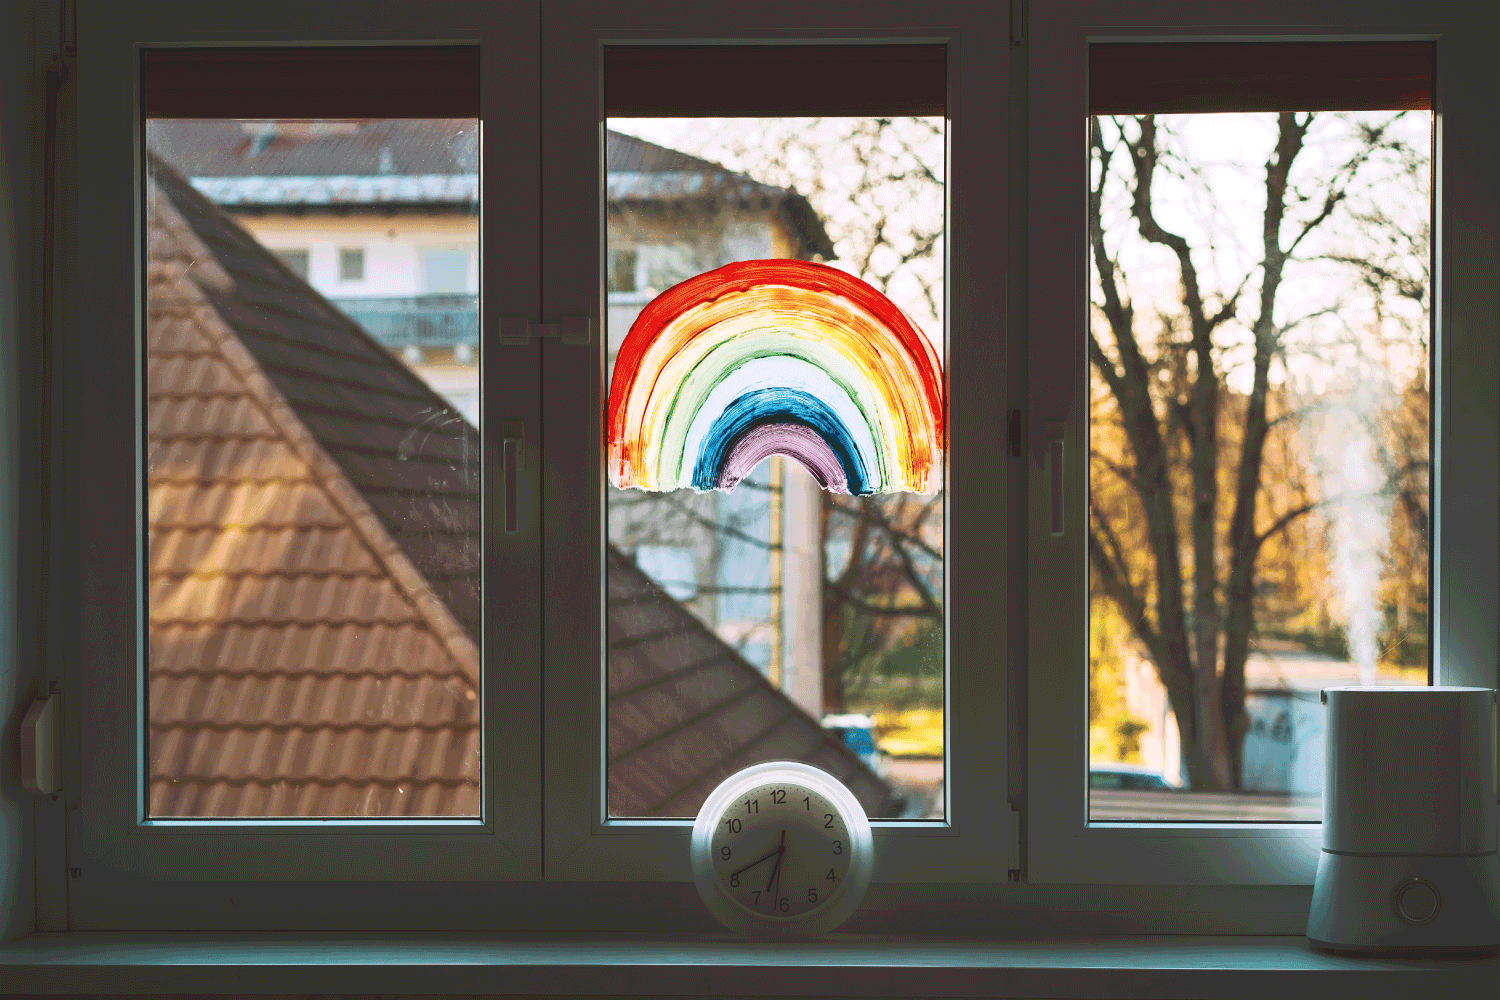 painting rainbow on window. Rainbow painted with paints on glass